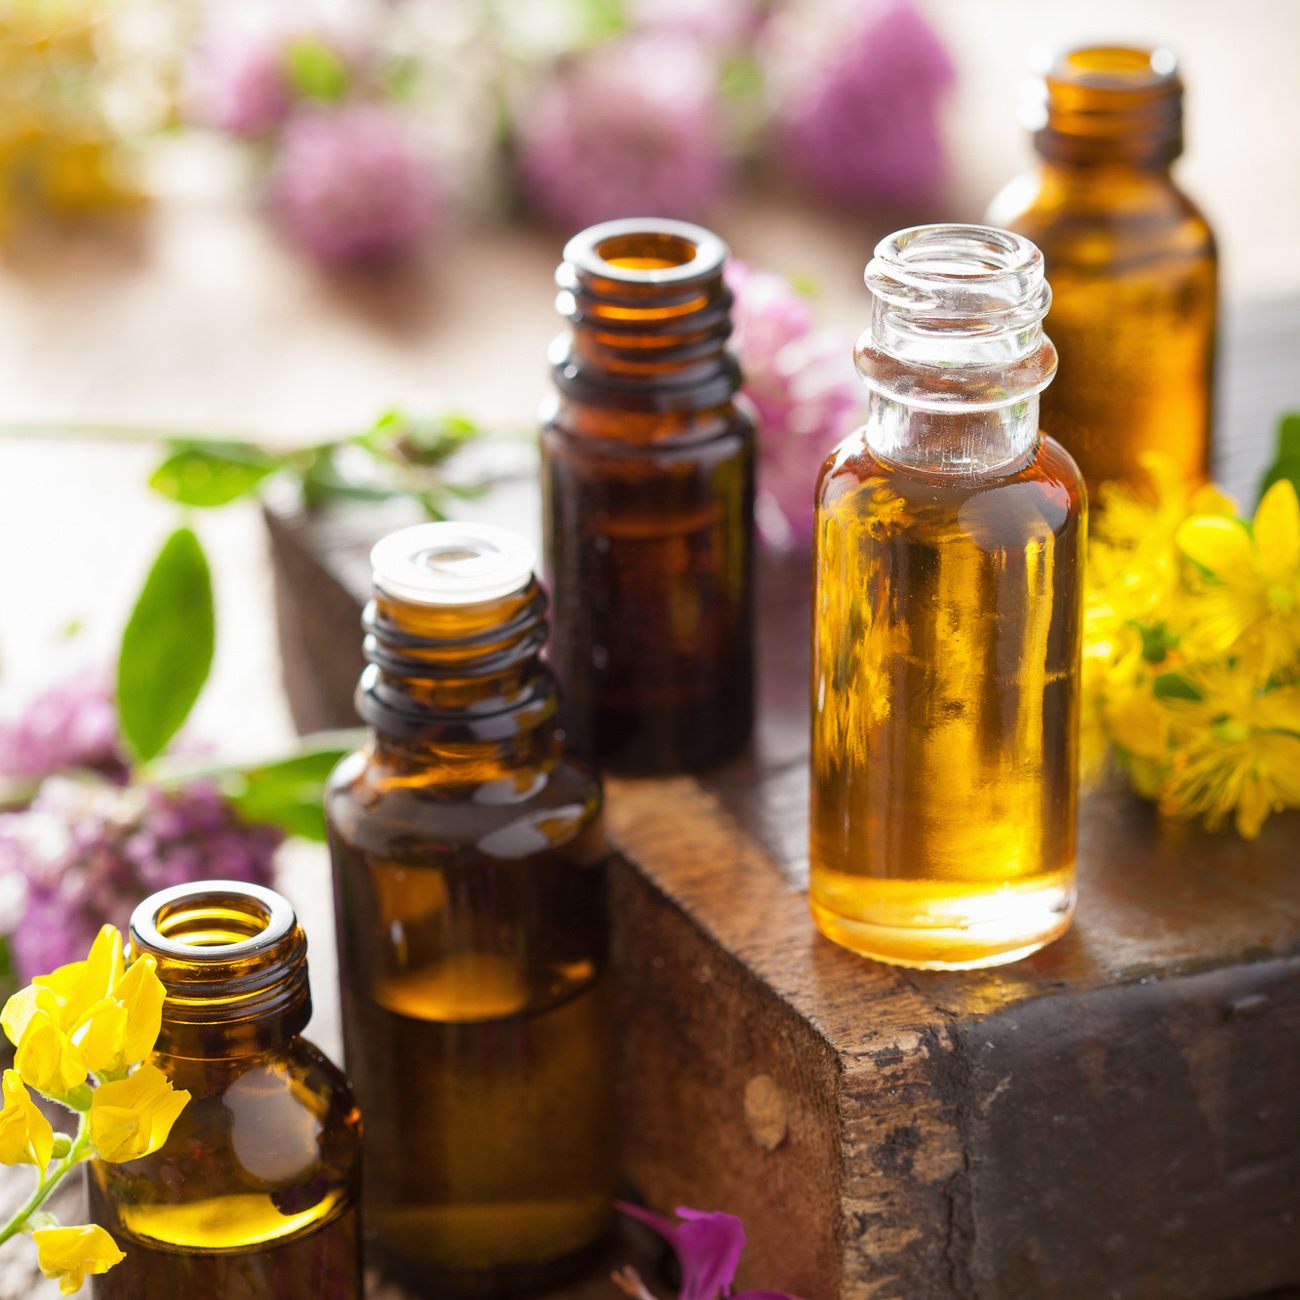 How to Use Essential Oils for Travel